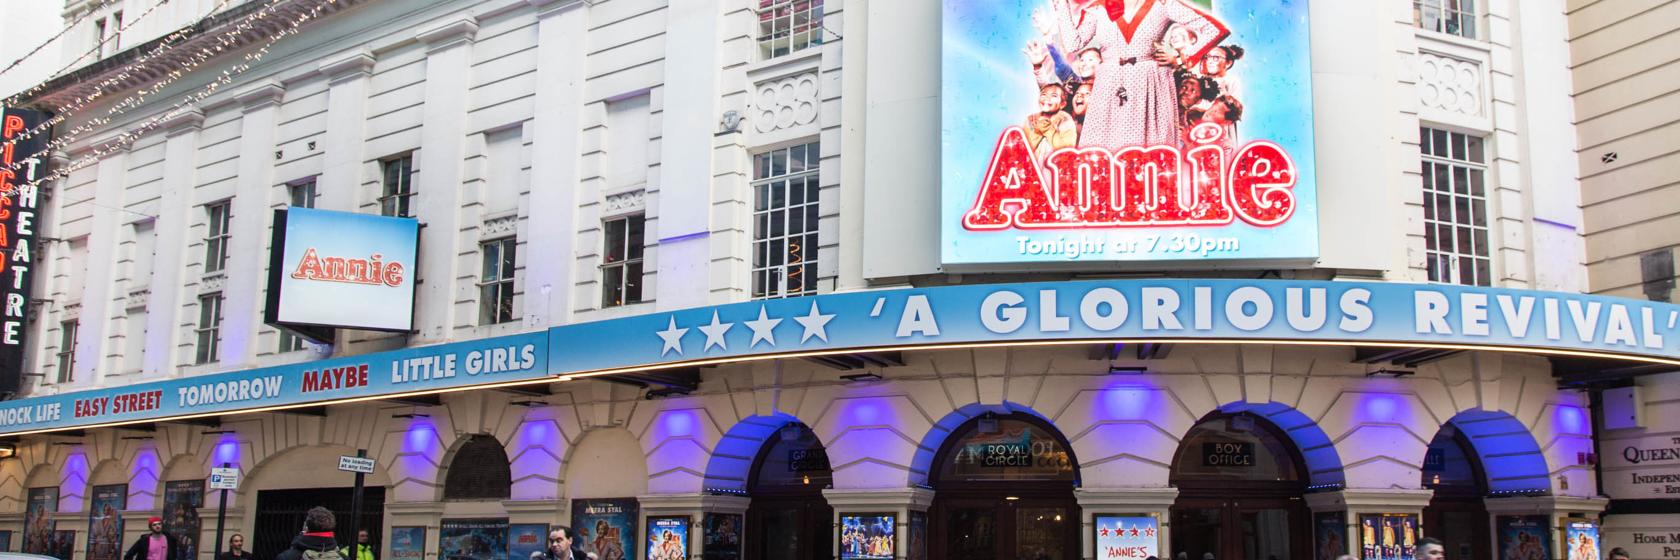 Piccadilly Theatre, London Hotels